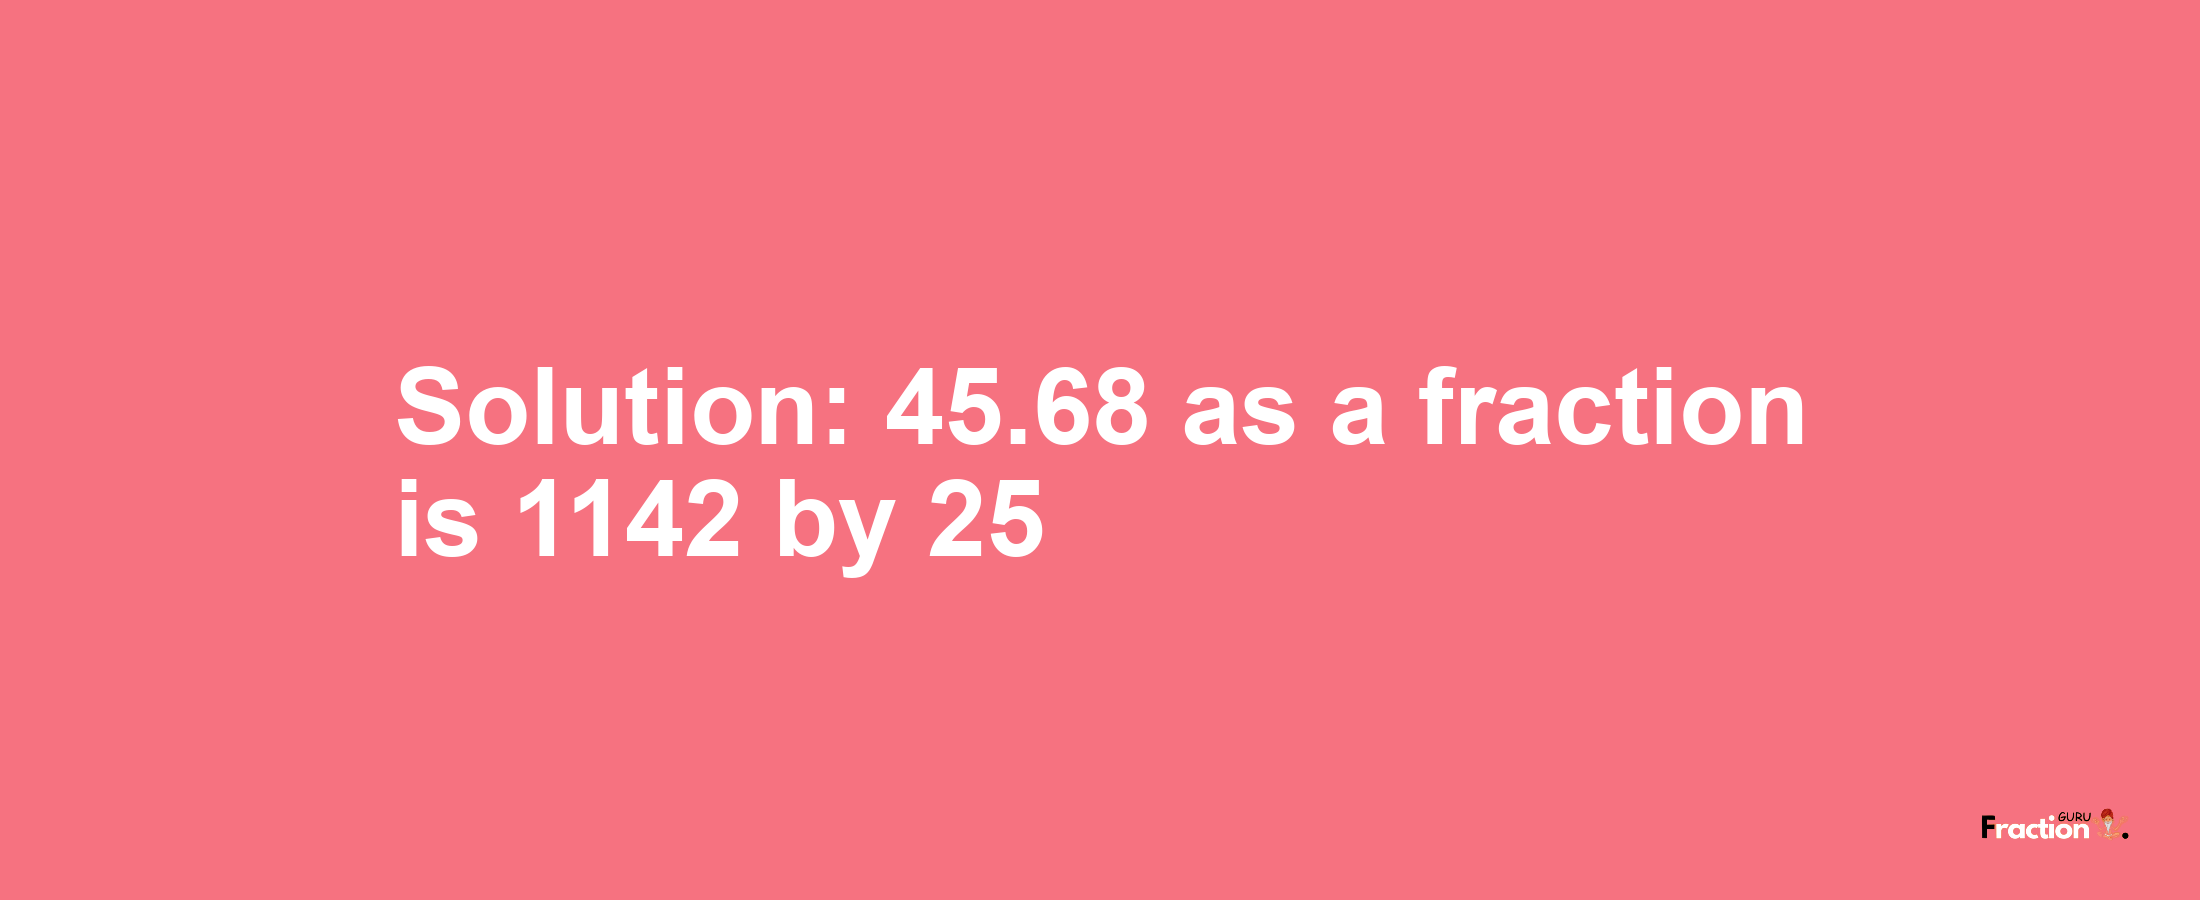 Solution:45.68 as a fraction is 1142/25